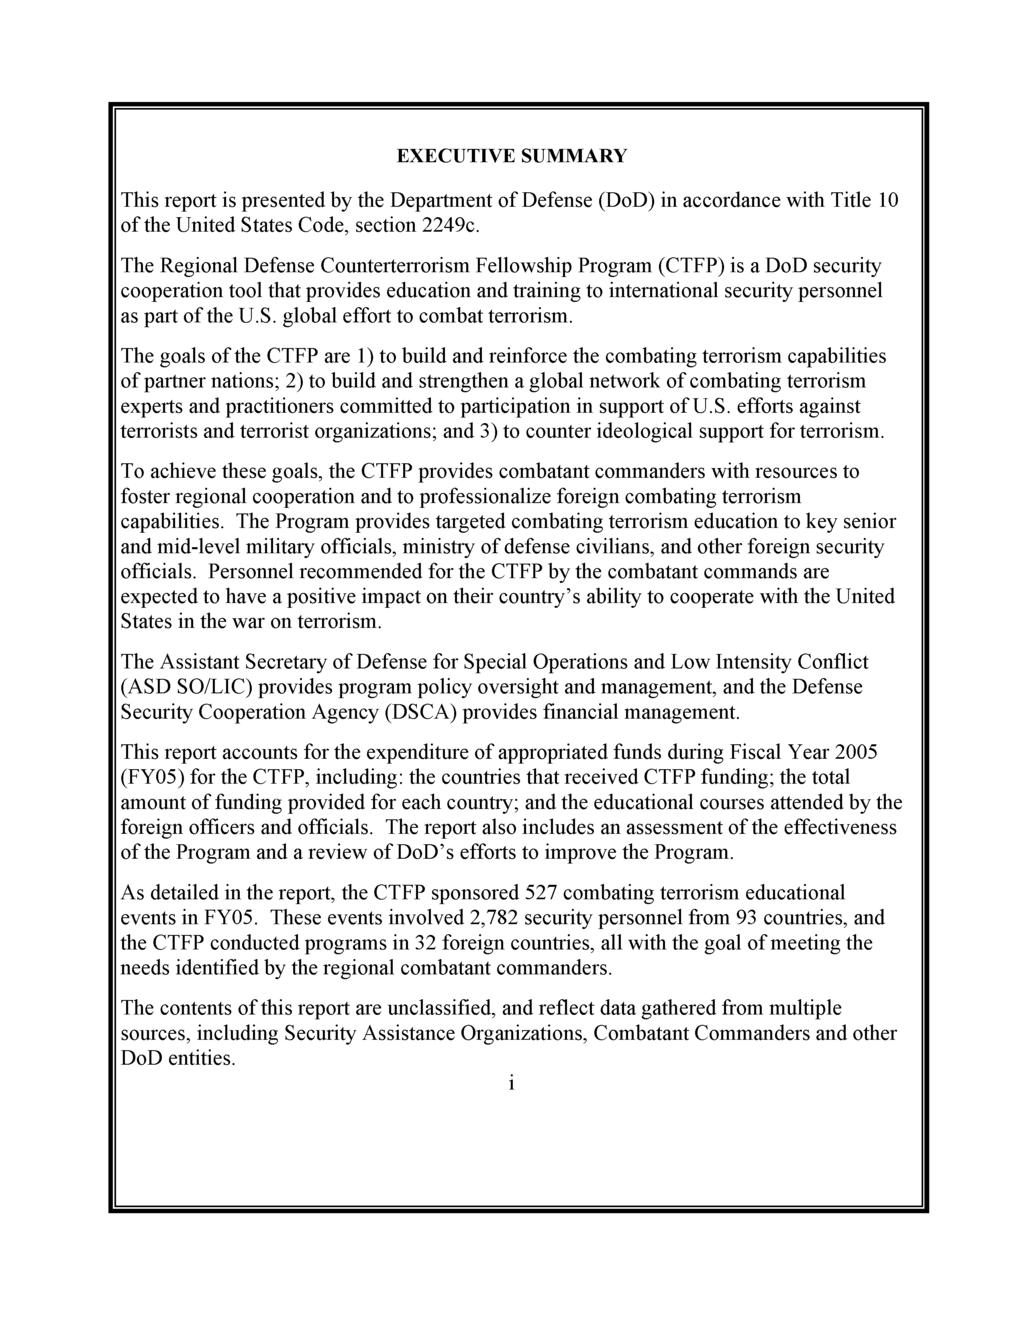 EXECUTIVE SUMMARY This report is presented by the Department of Defense (DoD) in accordance with Title 10 of the United States Code, section 2249c.